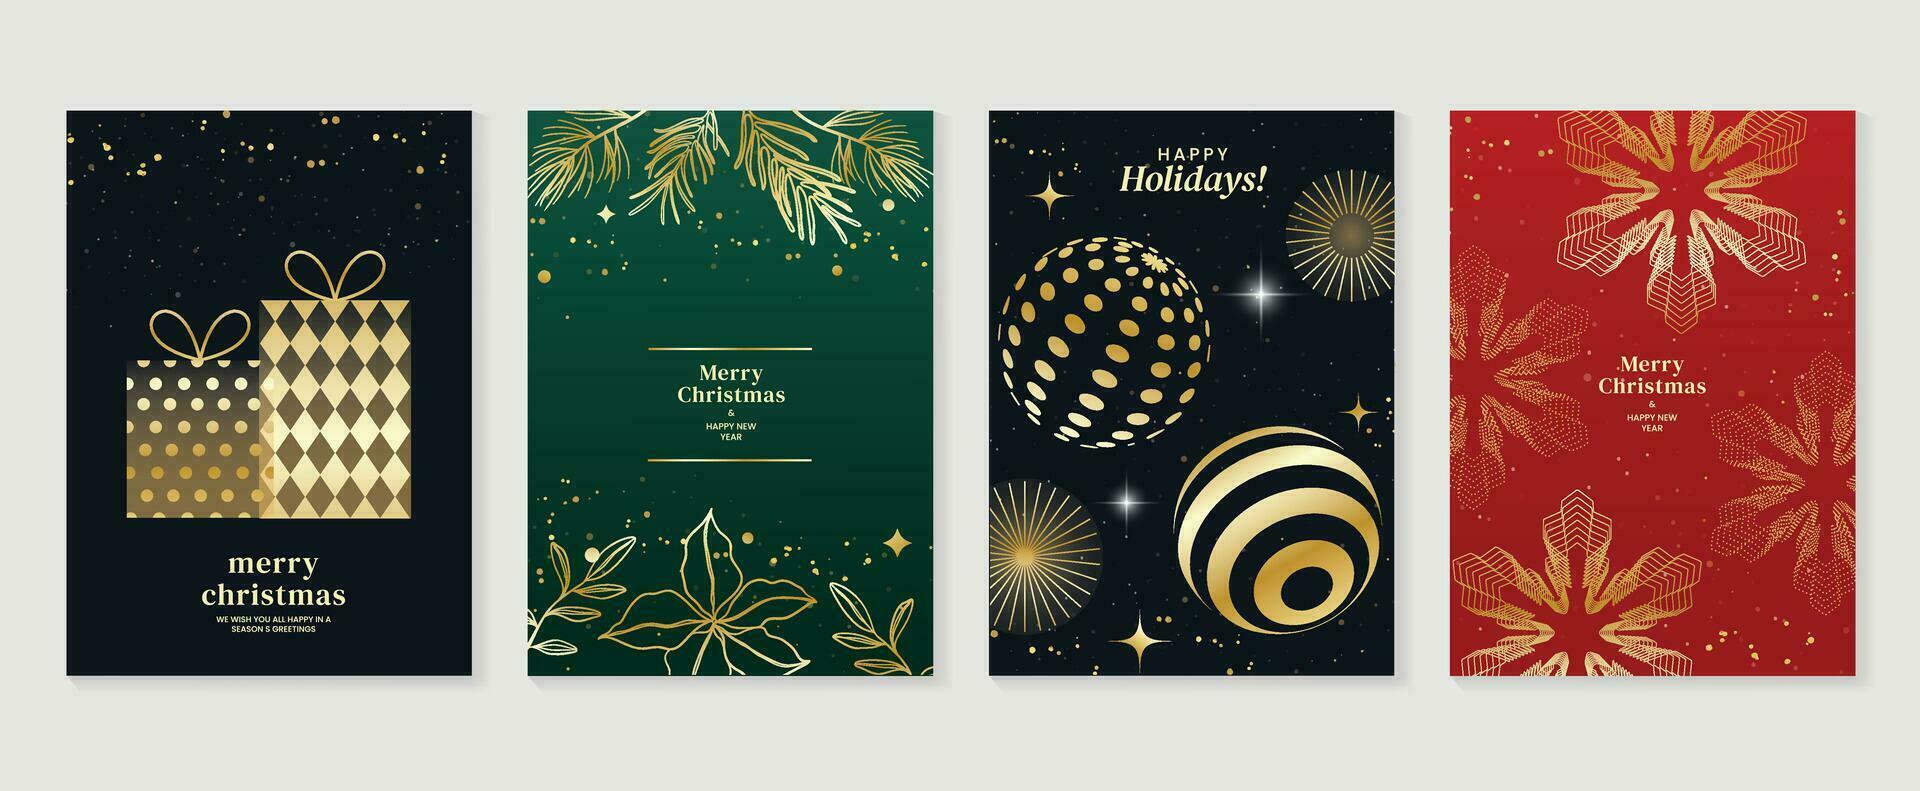 Luxury christmas invitation card art deco design vector. Christmas bauble ball, foliage, gift, firework line art on green, red and dark background. Design illustration for cover, poster, wallpaper. vector